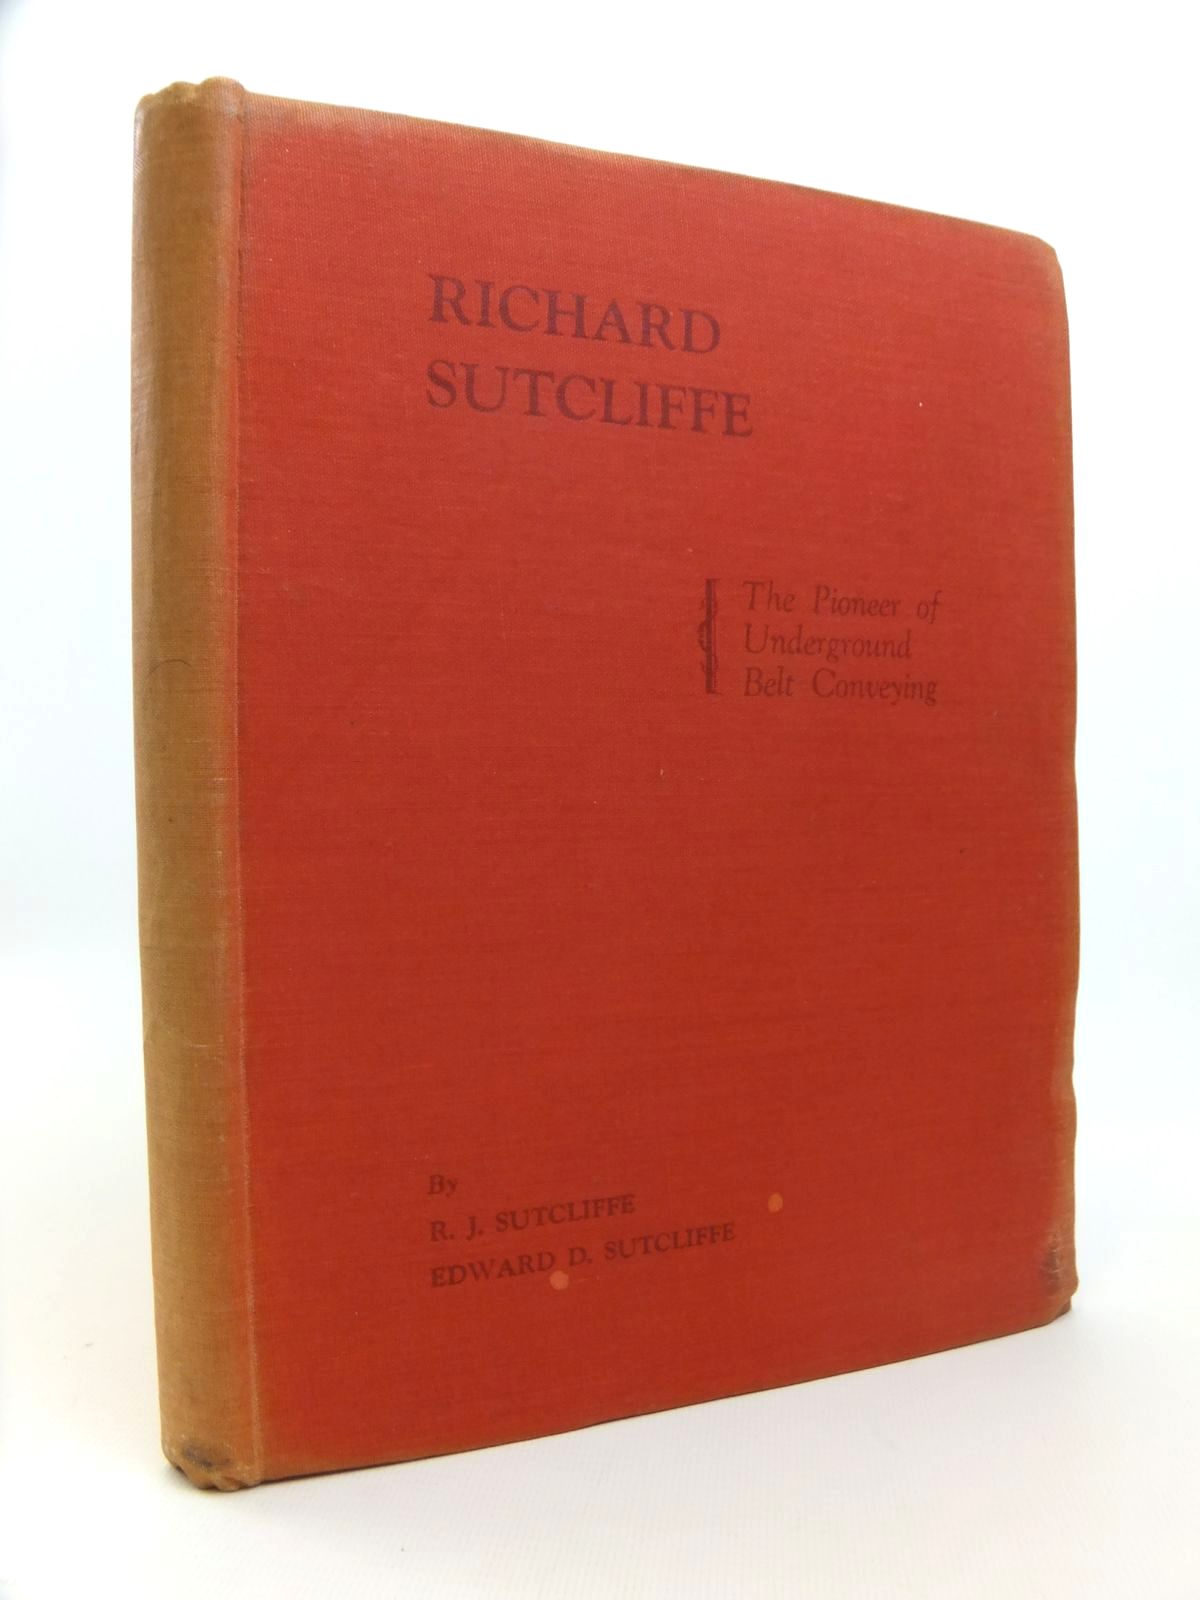 Photo of RICHARD SUTCLIFFE: THE PIONEER OF UNDERGROUND BELT CONVEYING- Stock Number: 1812299